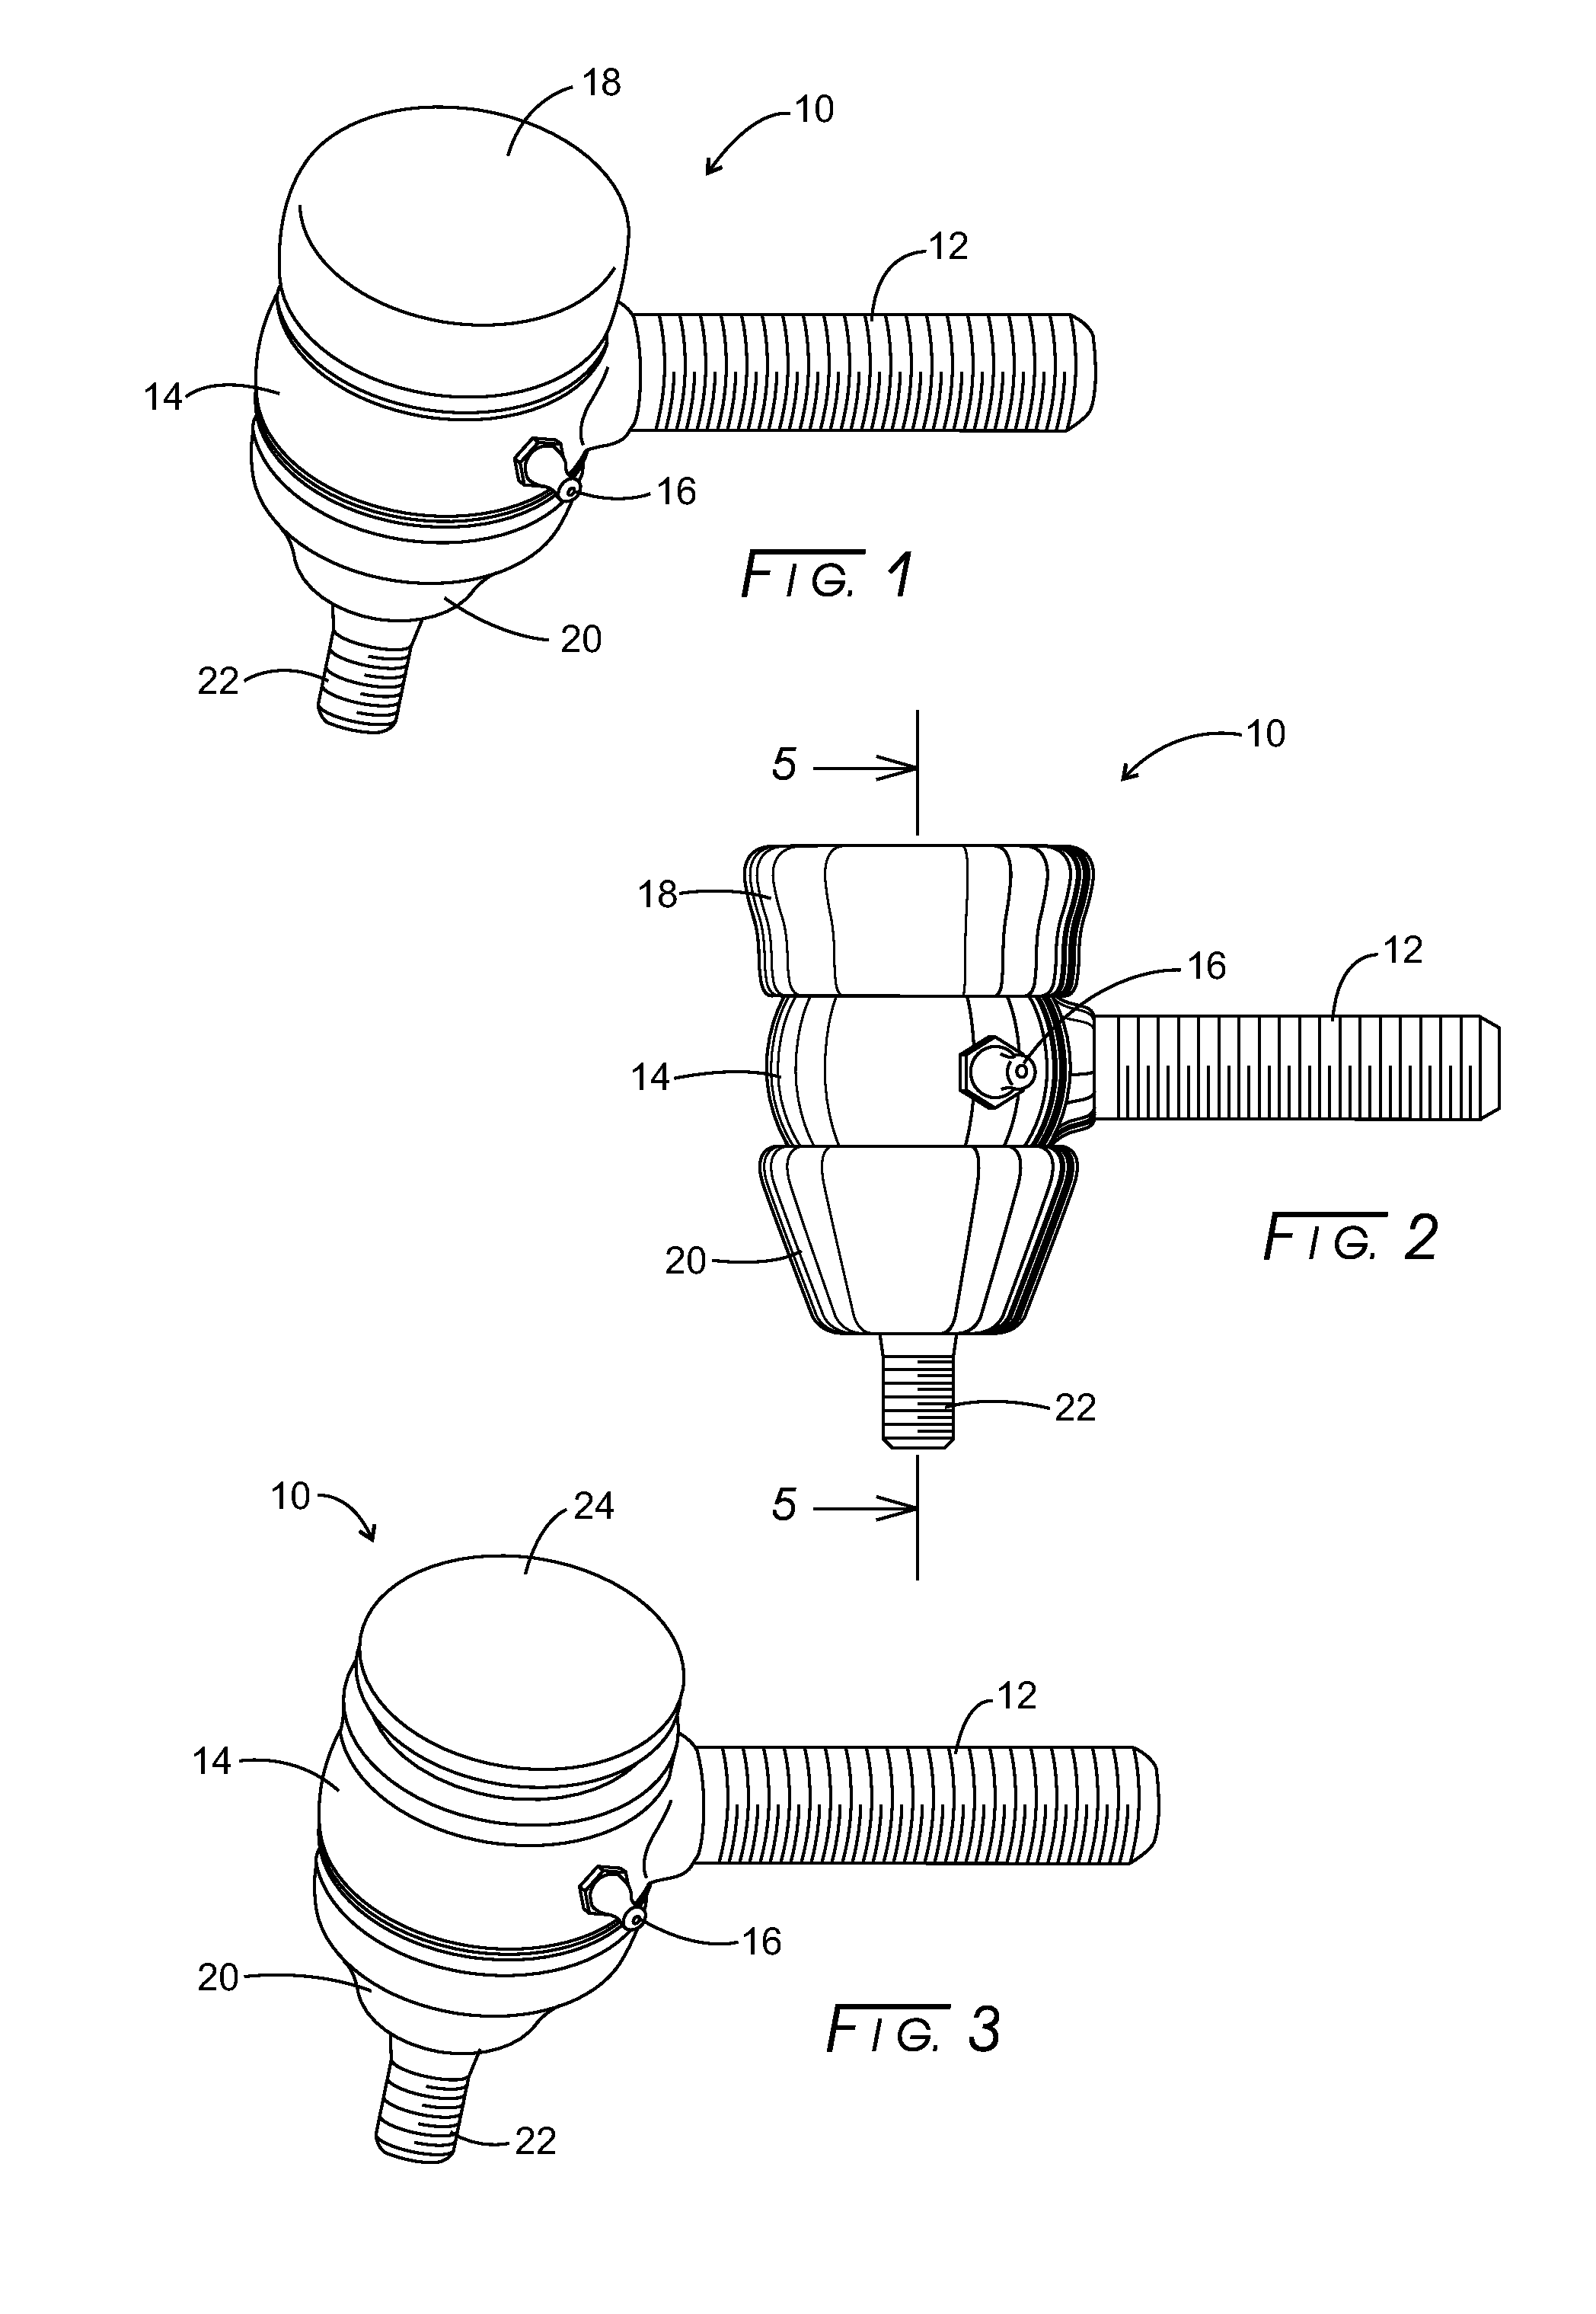 Tie rod assembly with integrated safety tip